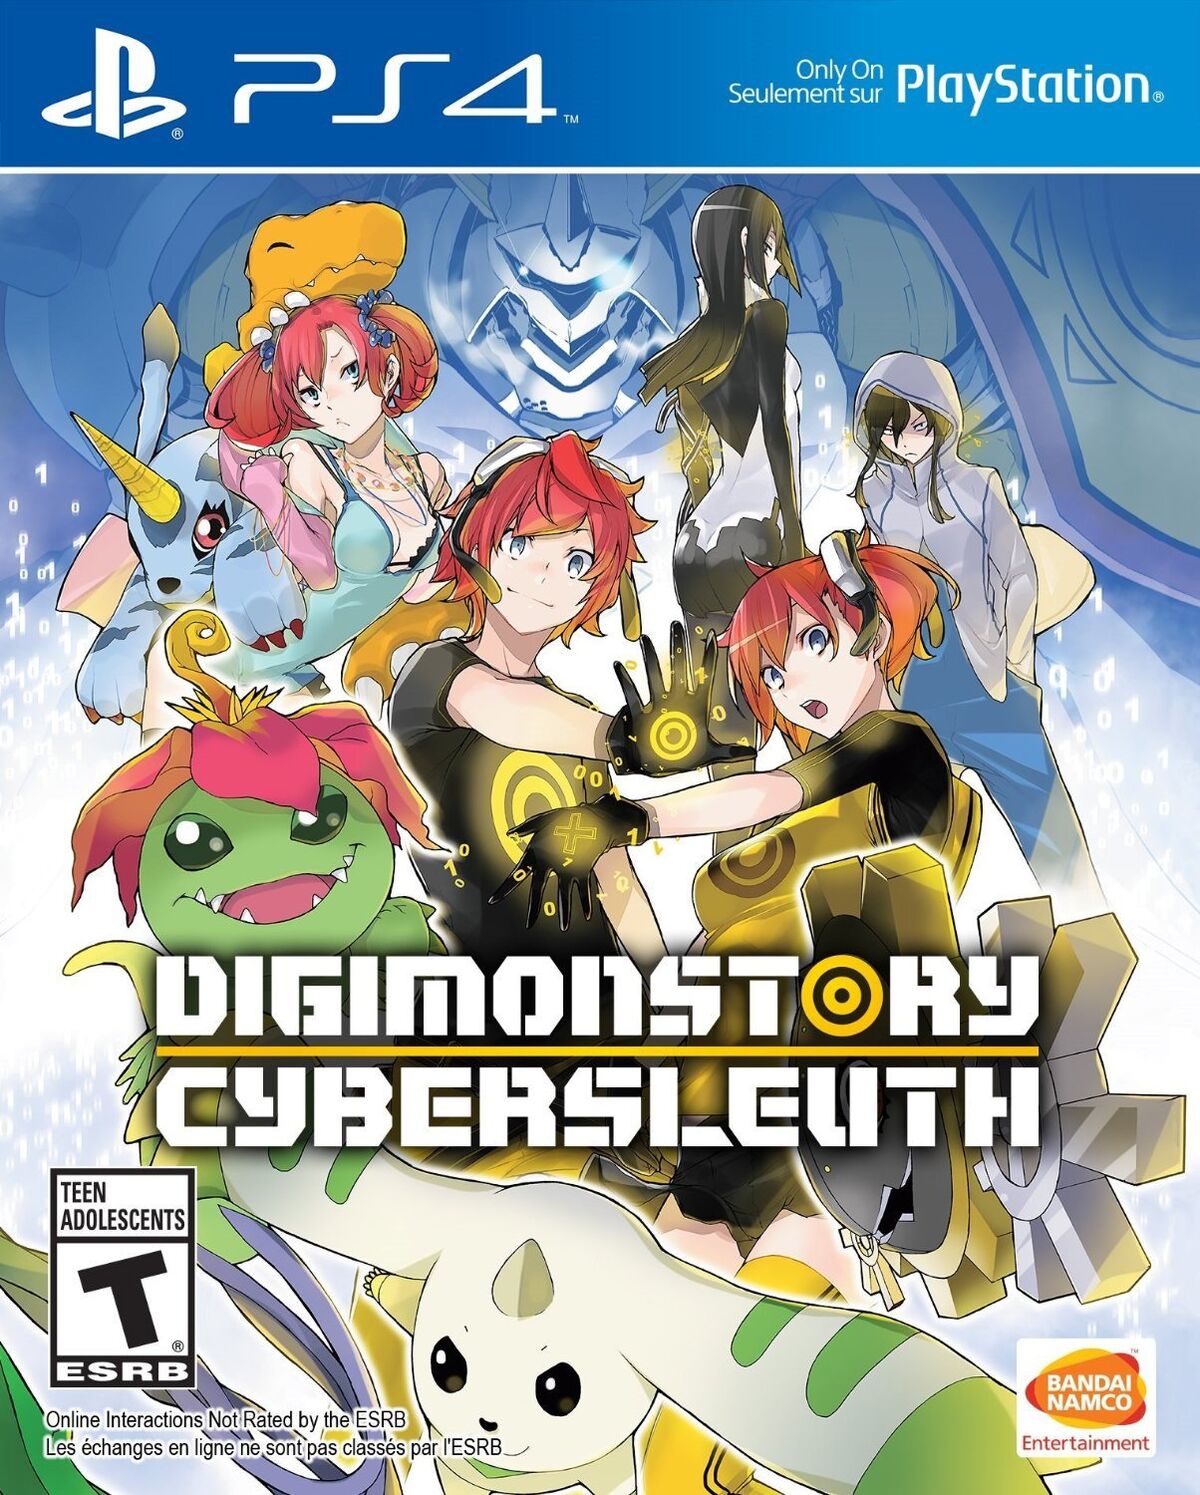 March 24, 2015 Patch - Digimon Masters Online Wiki - DMO Wiki